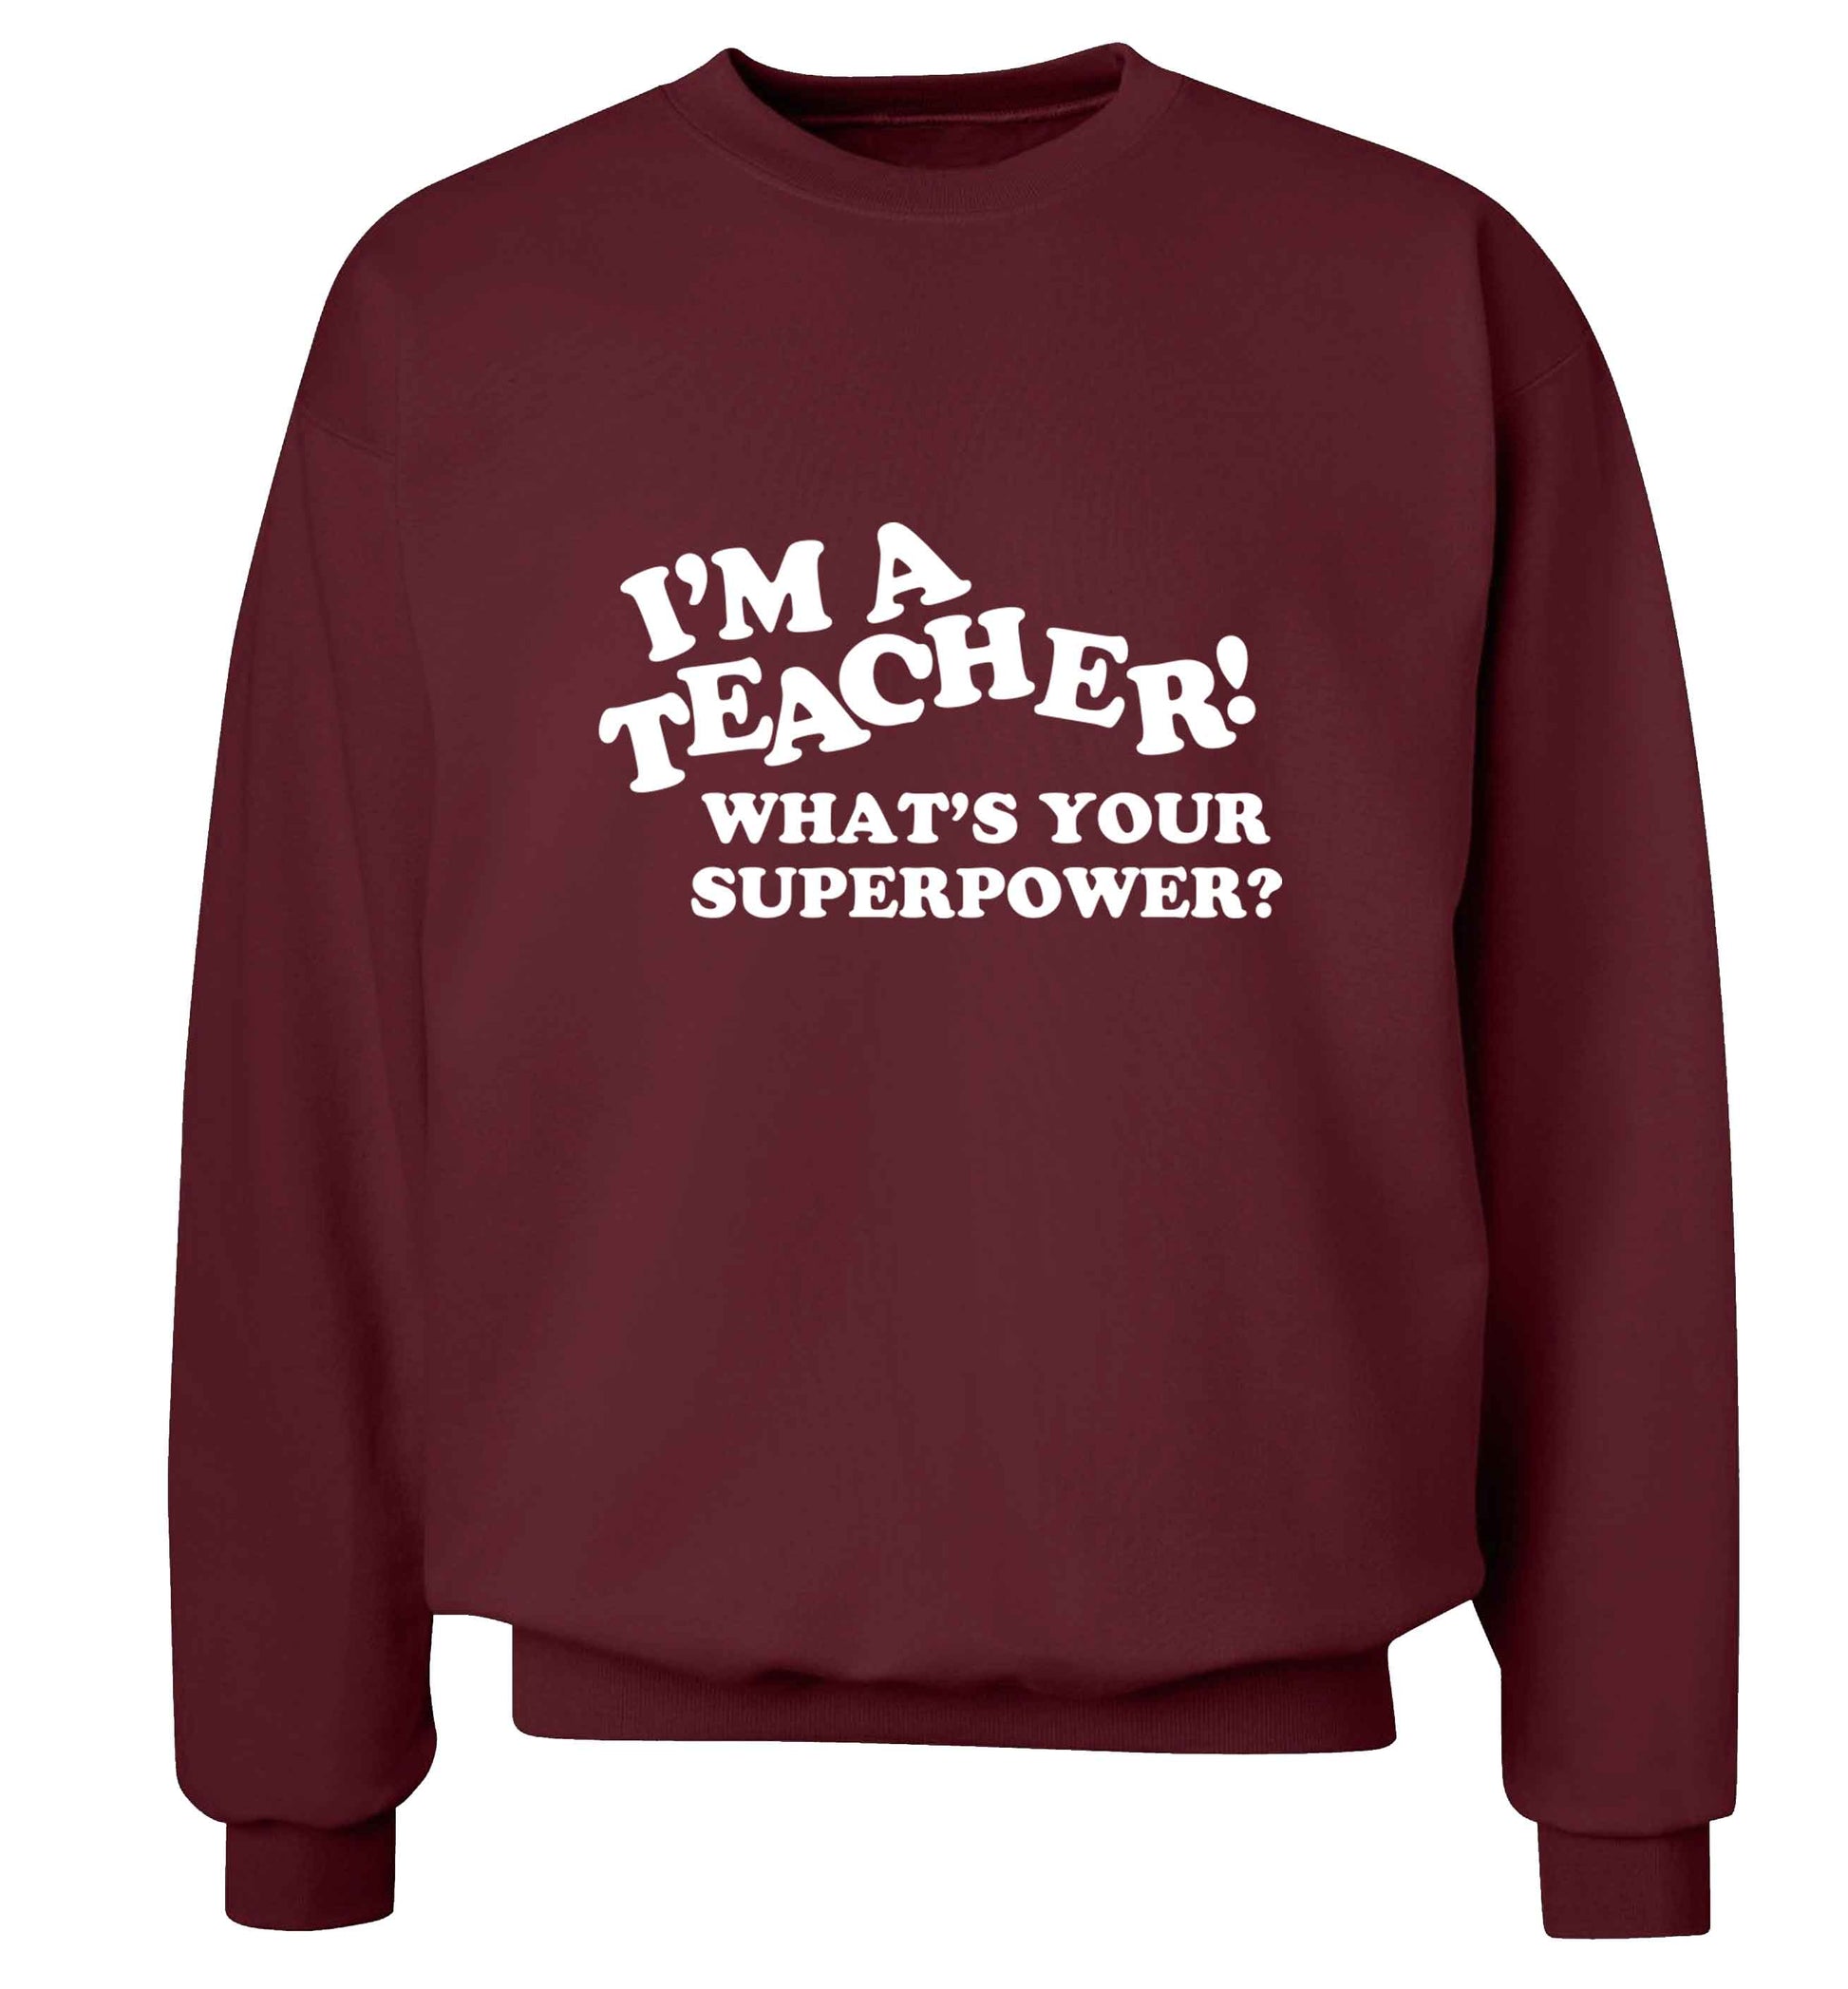 I'm a teacher what's your superpower?! adult's unisex maroon sweater 2XL